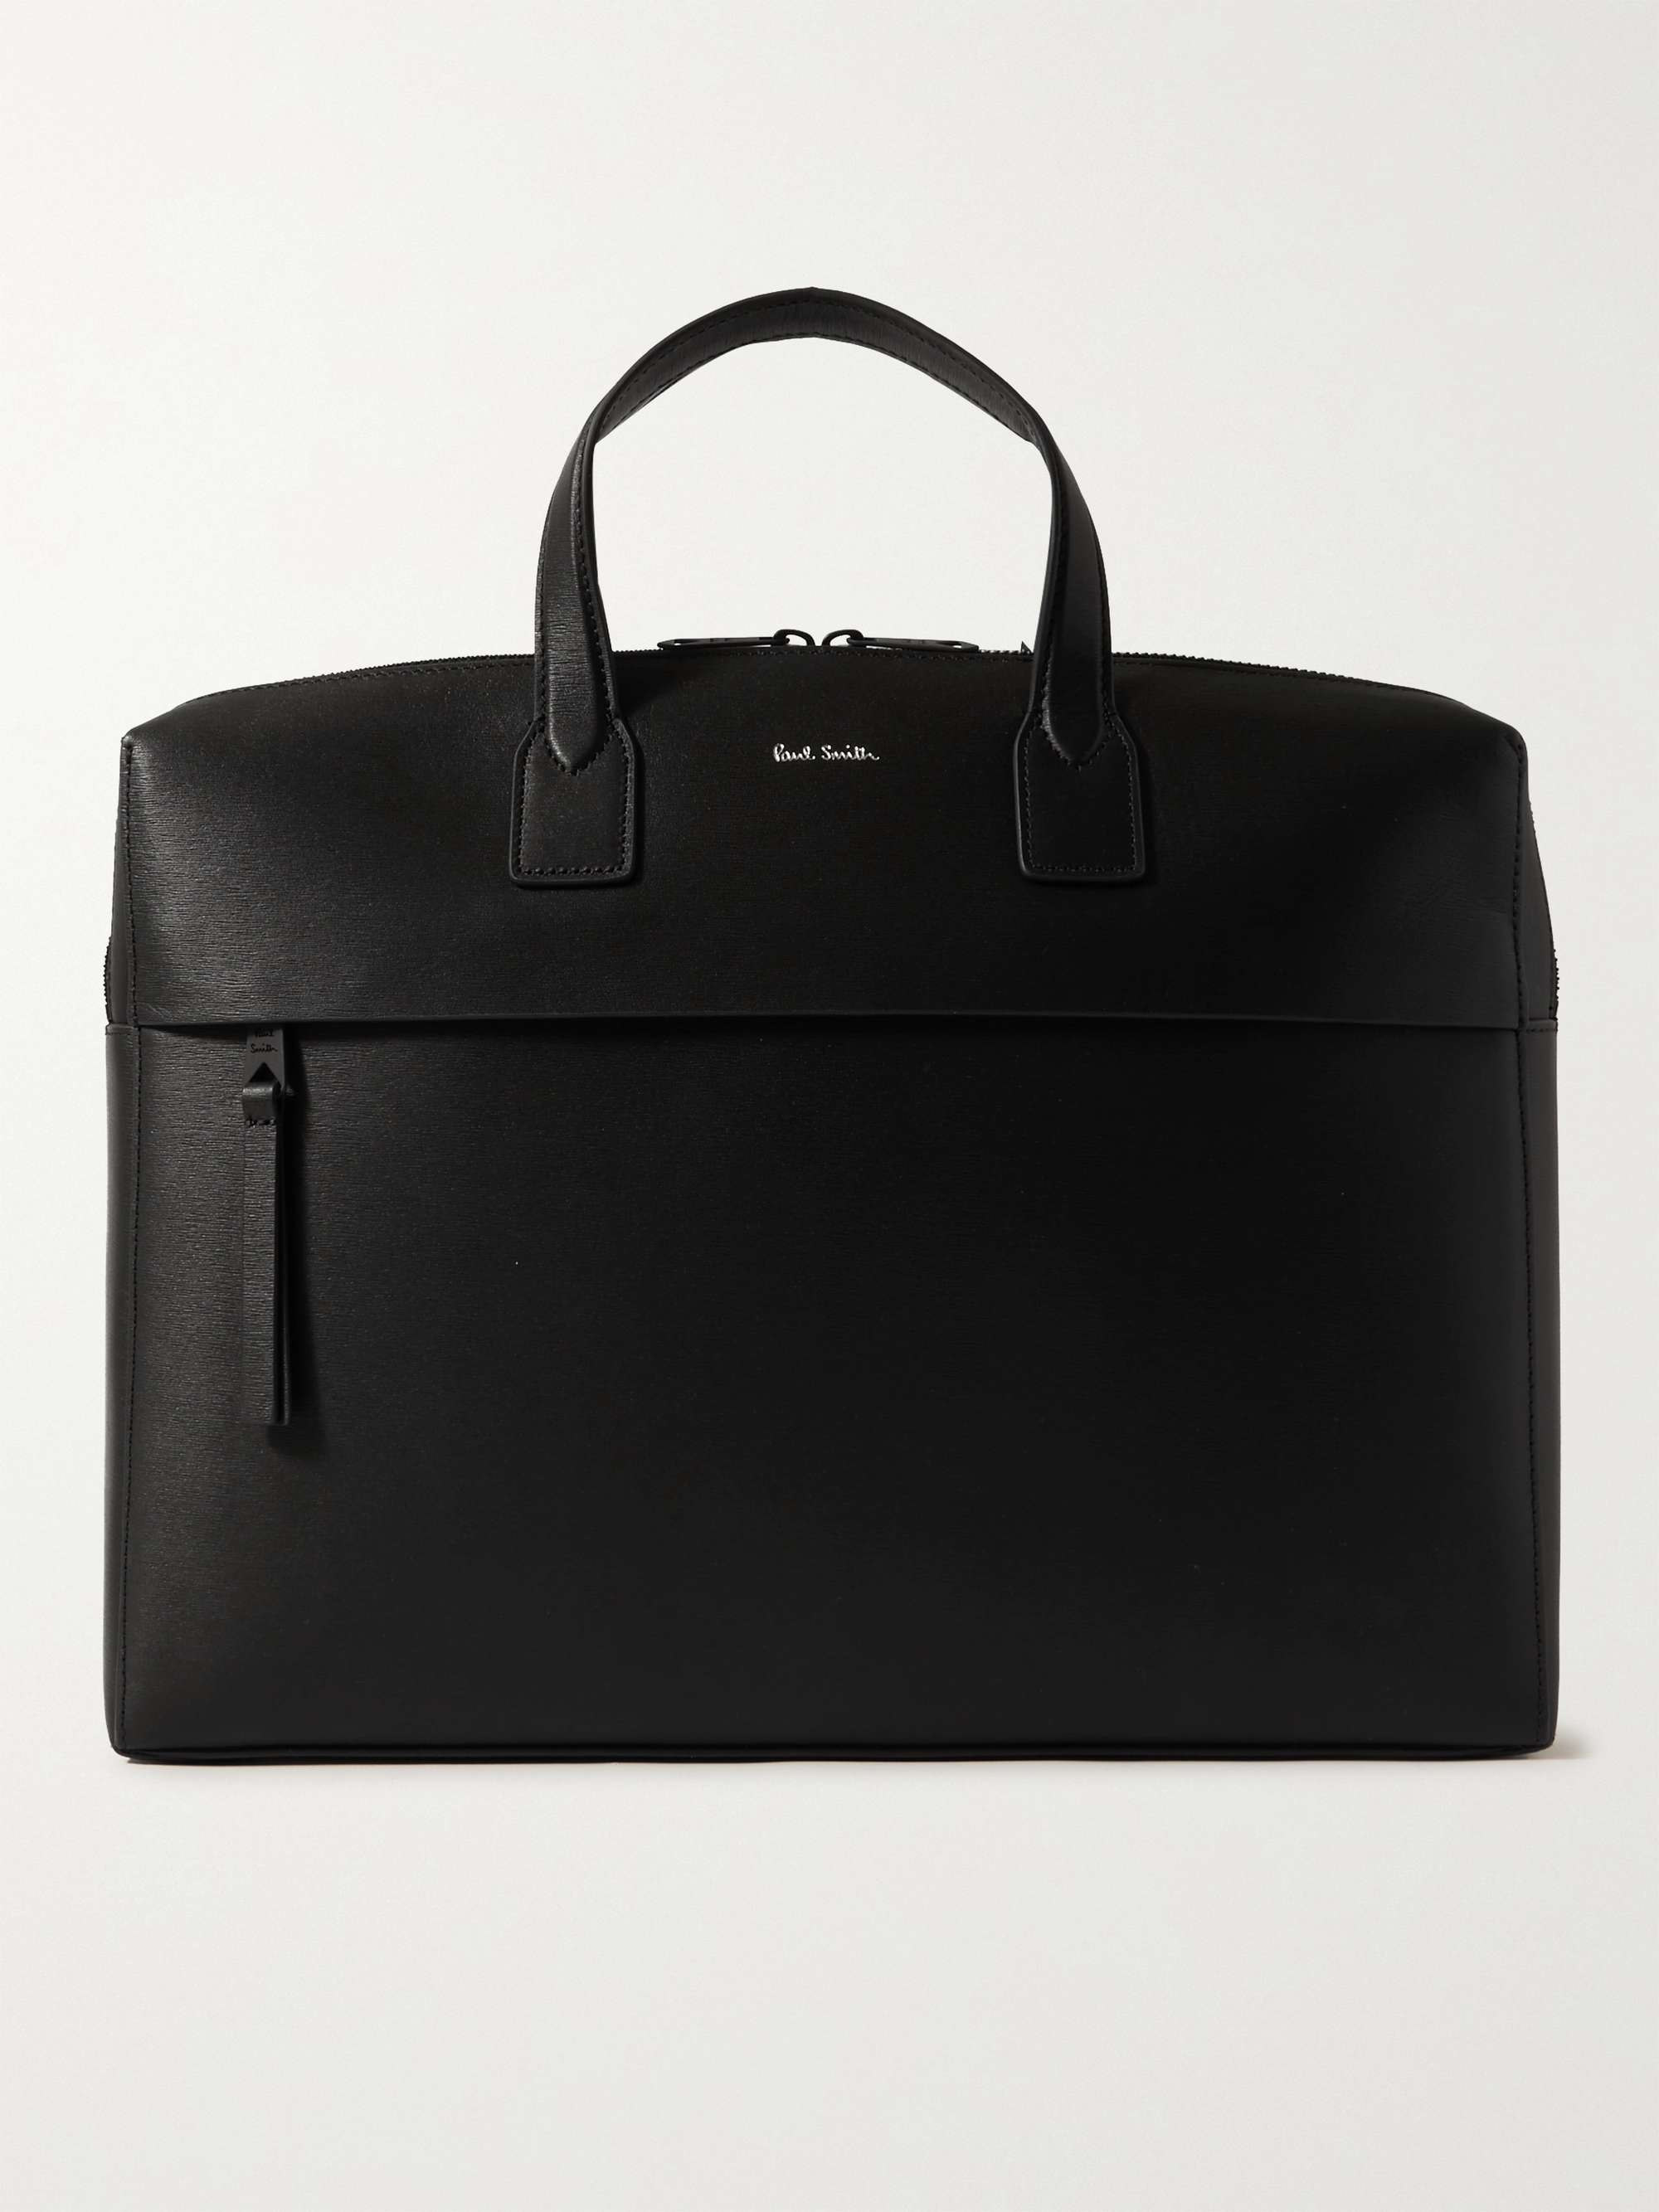 Paul Smith - Embossed Leather Backpack Paul Smith